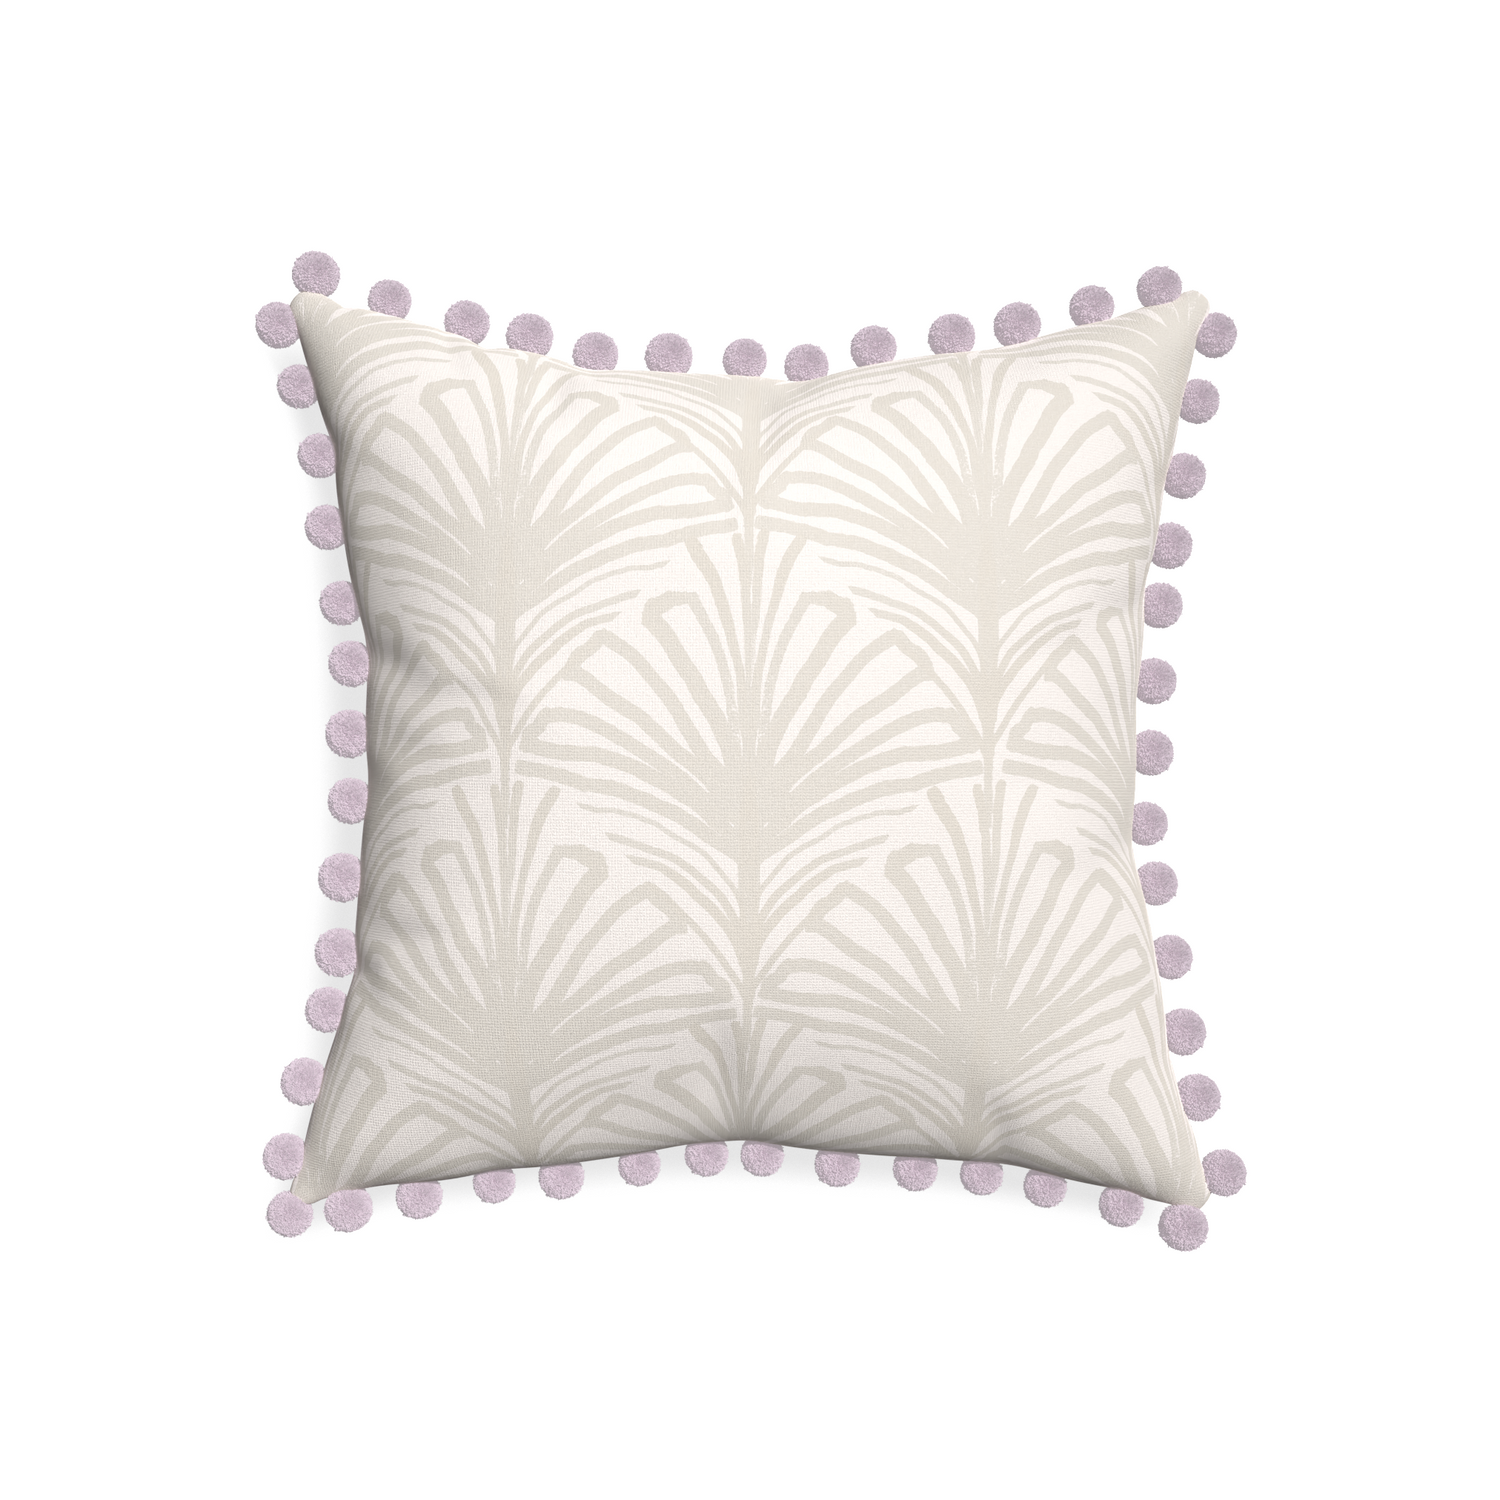 20-square suzy sand custom pillow with l on white background